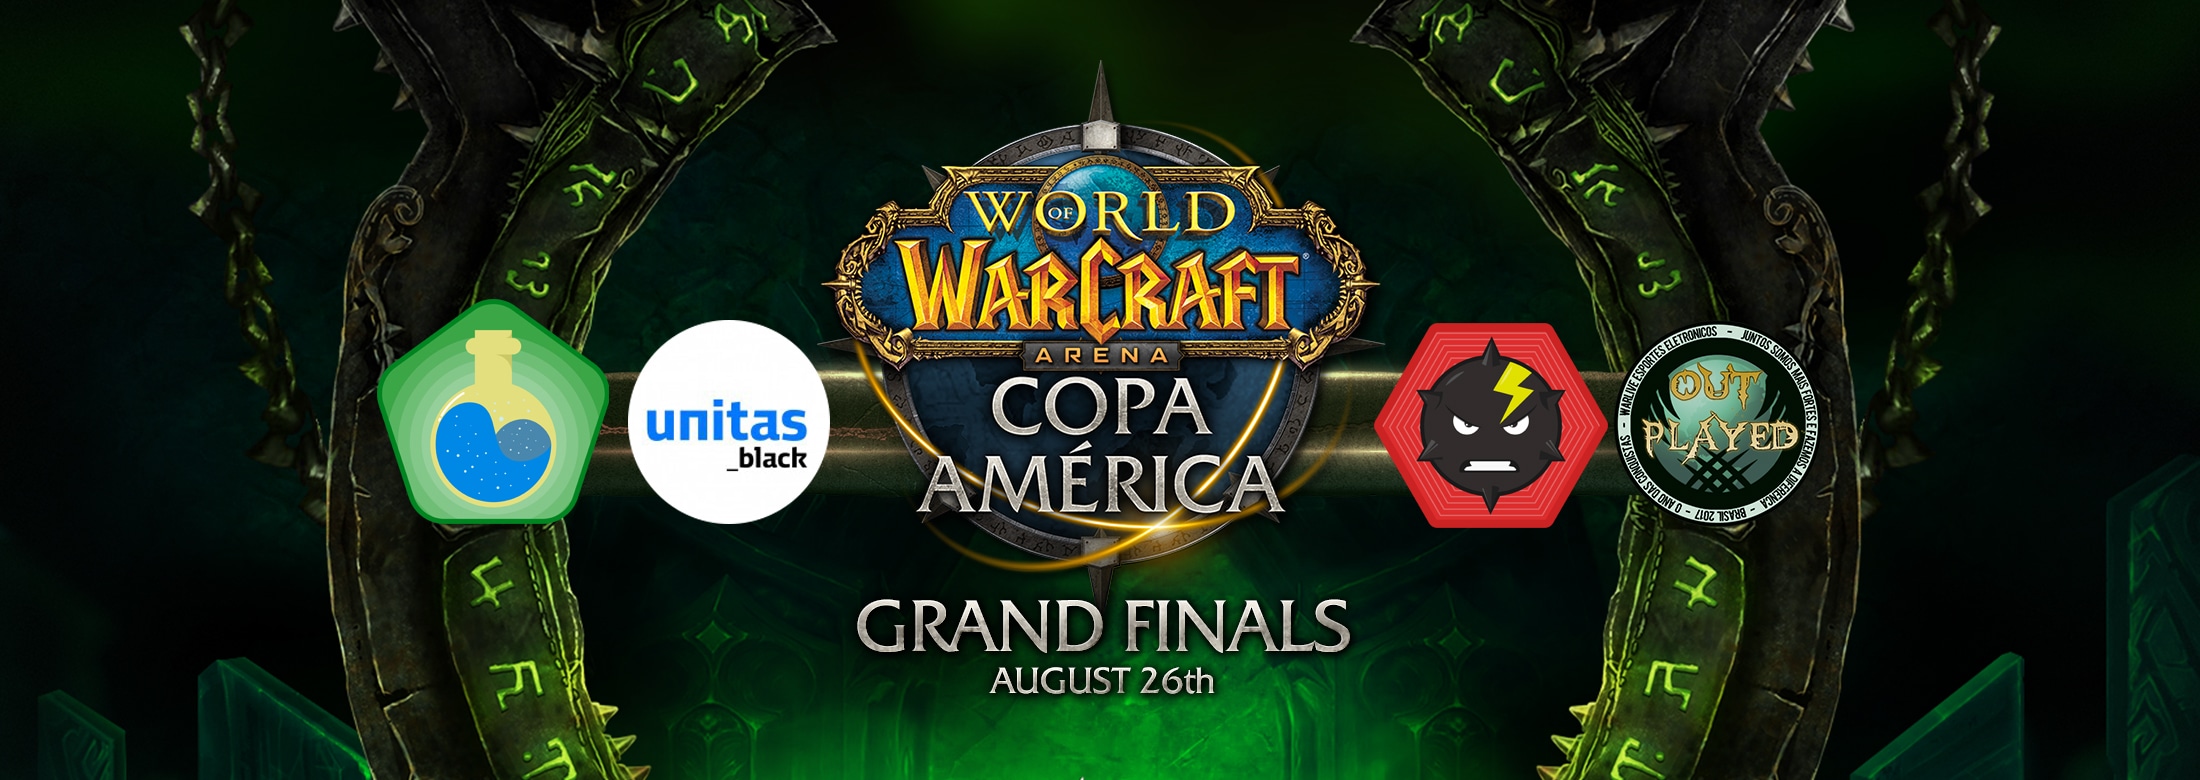 Watch the WoW Arena Copa America Grand Finals VoD!